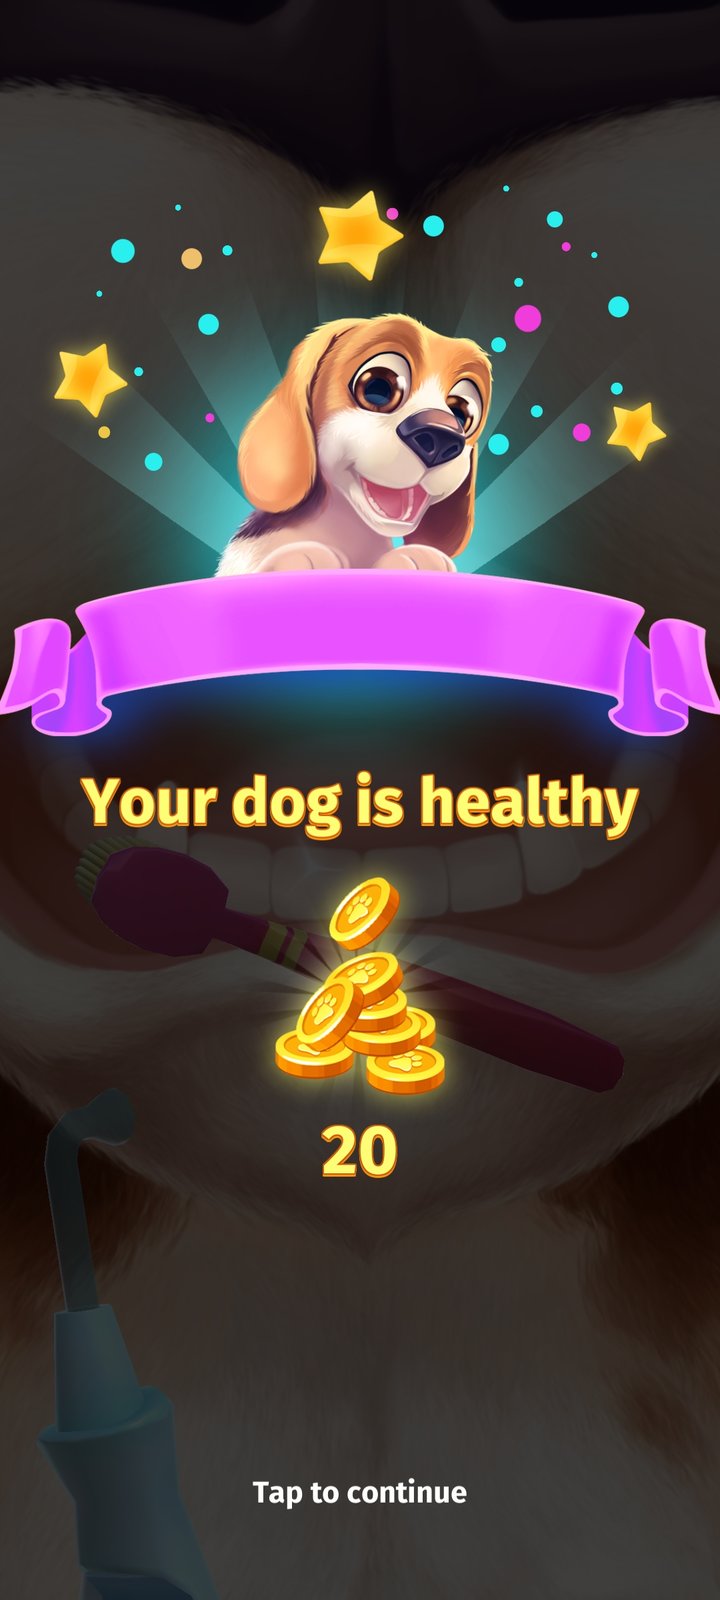 Moy 7 - Virtual Pet Game Ver. 2.171 MOD APK  Unlimited Money -   - Android & iOS MODs, Mobile Games & Apps